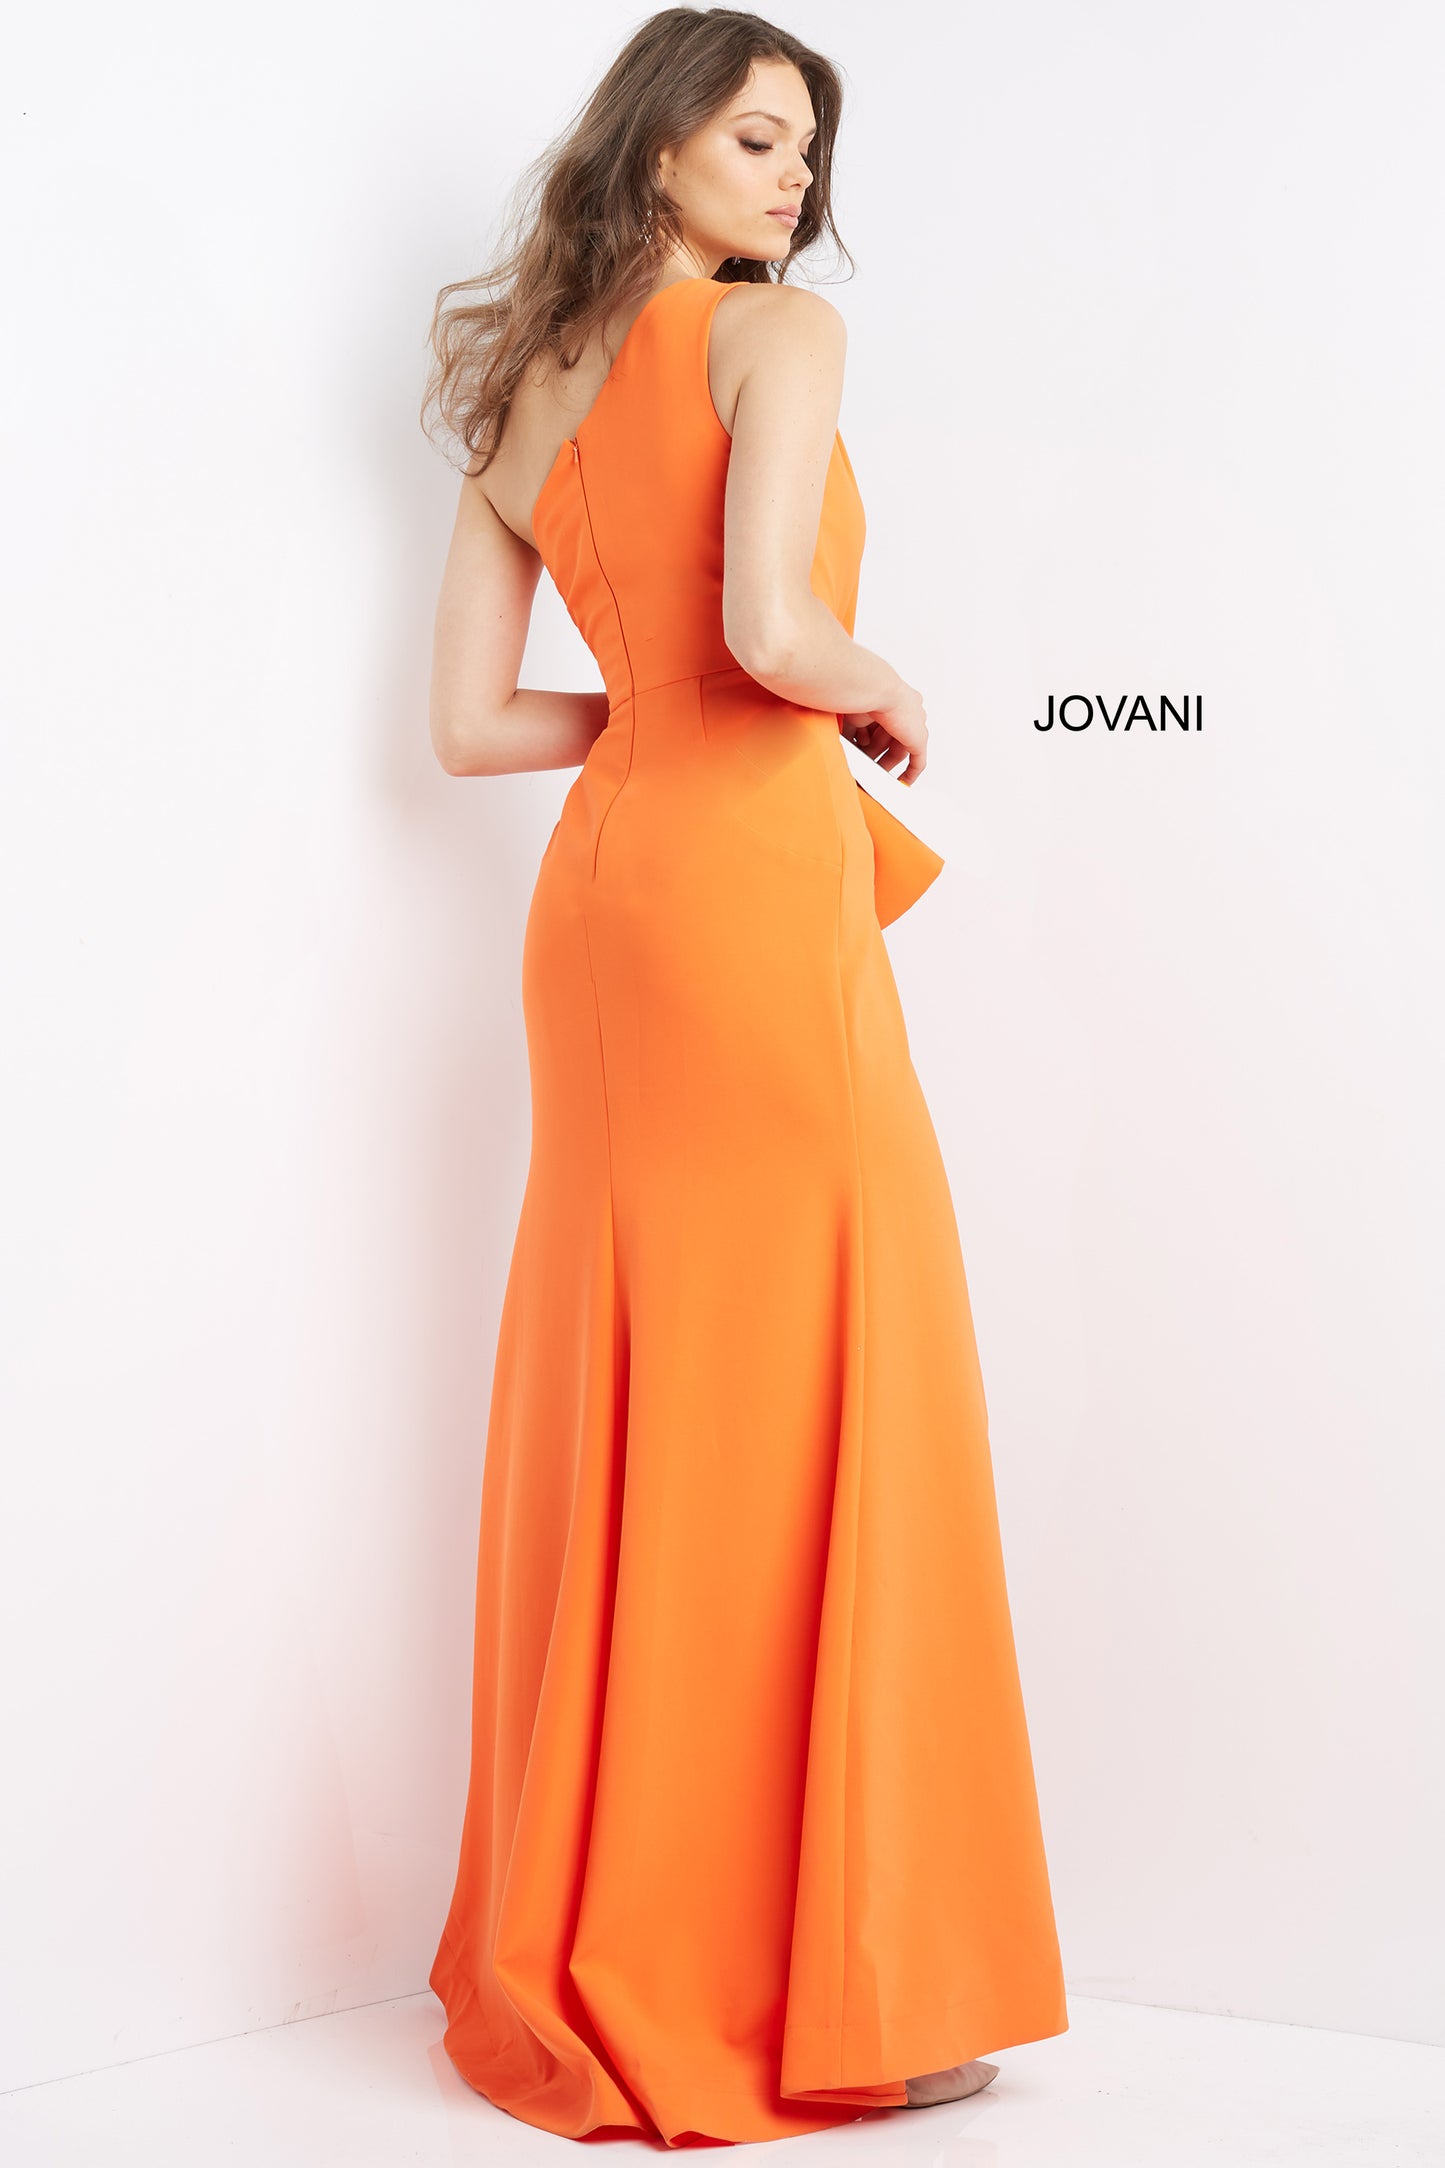 Jovani 06756 Long Straight Prom Pageant Gown maxi slit dress one shoulder  Available Size- 00-24  Available Color- Orange, Navy, Yellow, Black, Red, Peacock